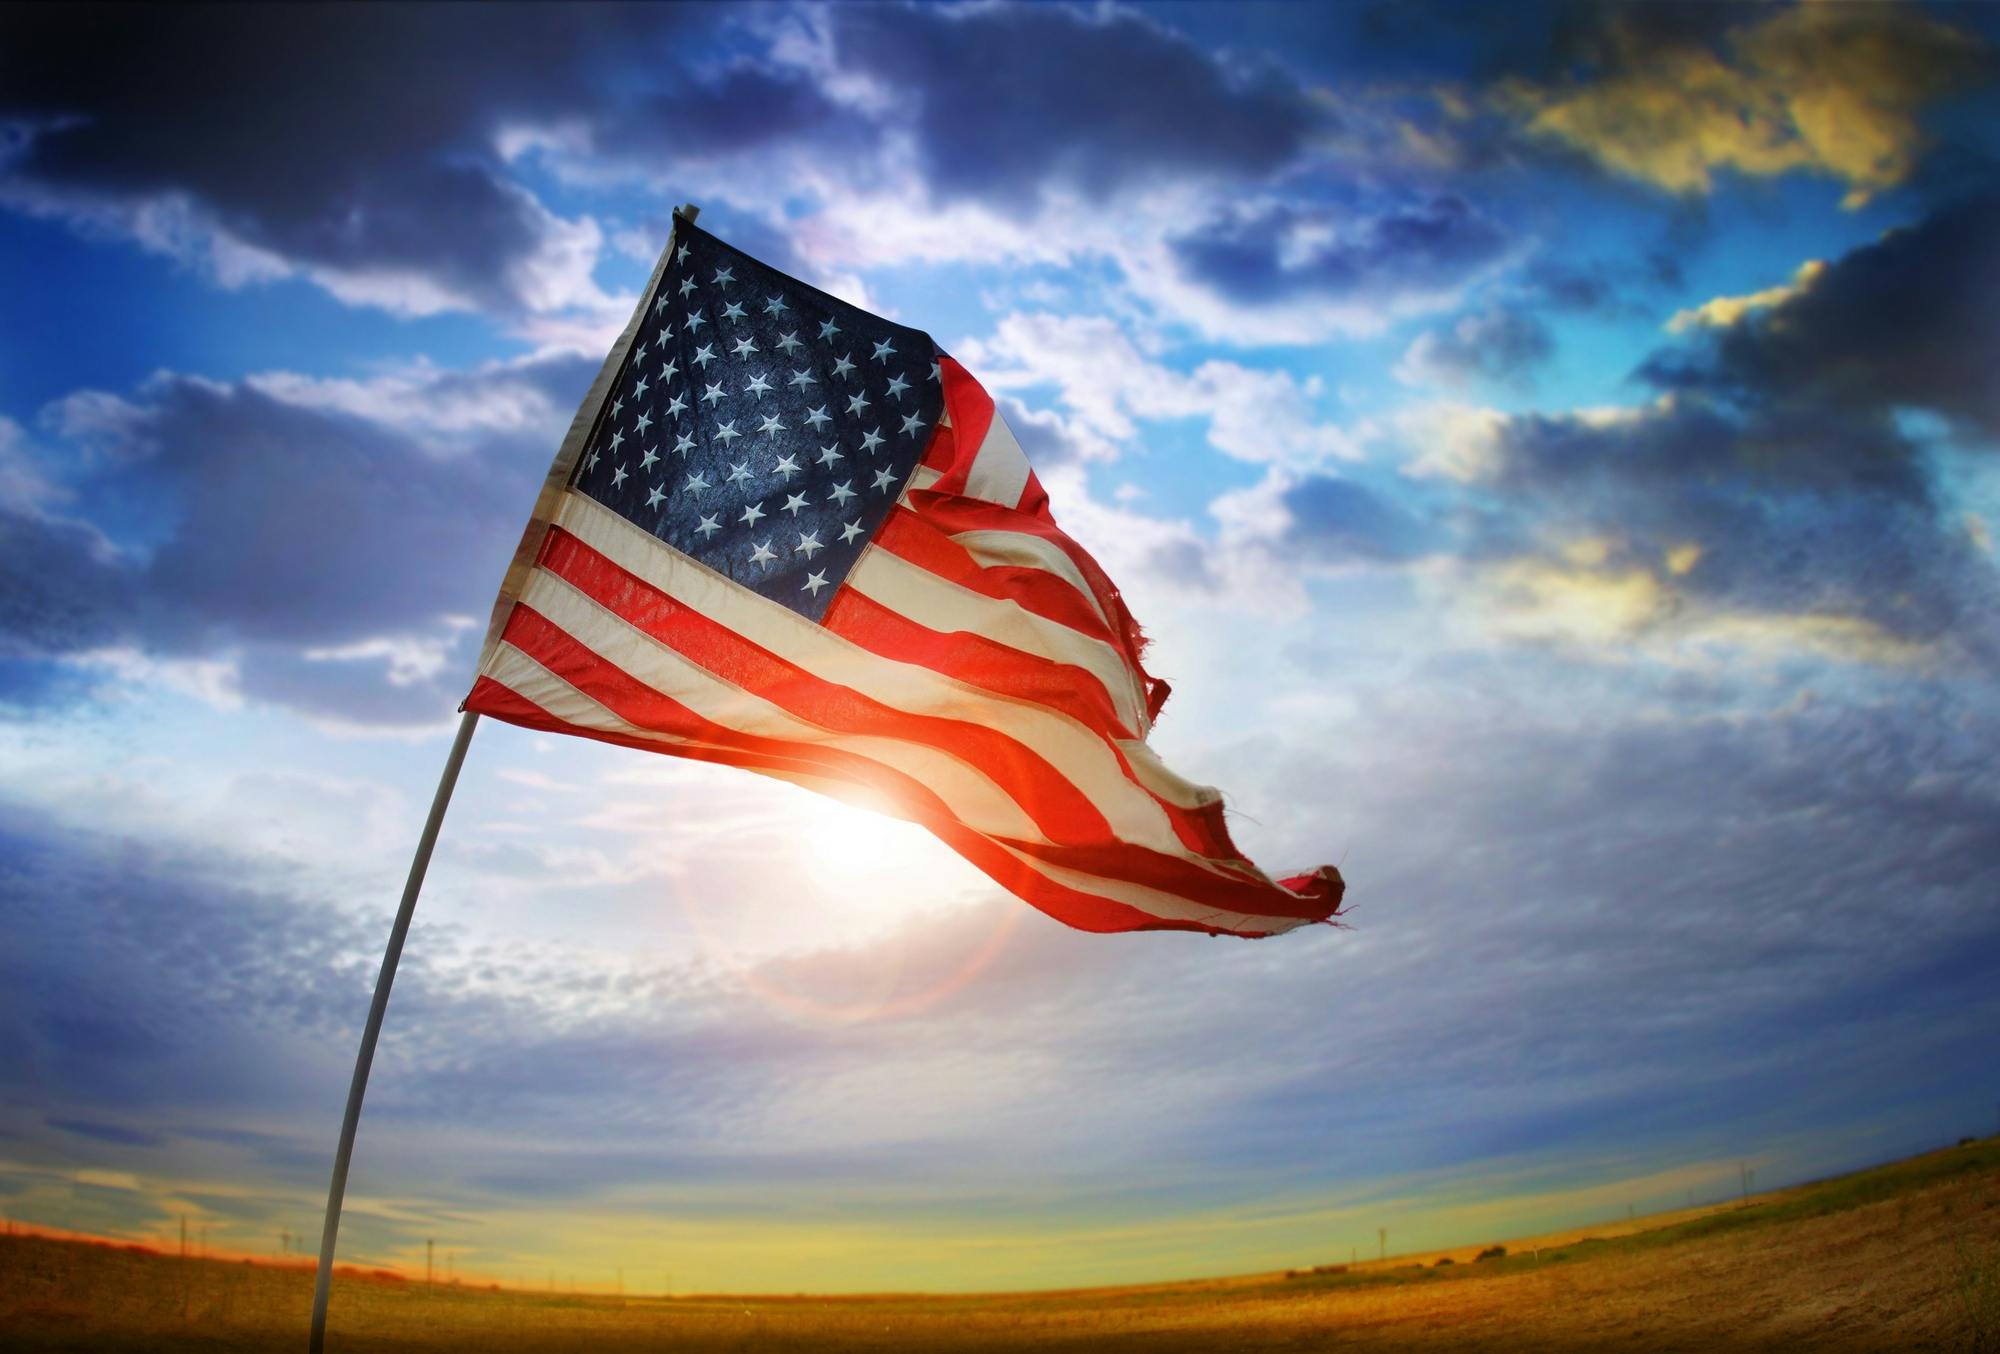 An American flag waves in the air with a sun setting in the background.